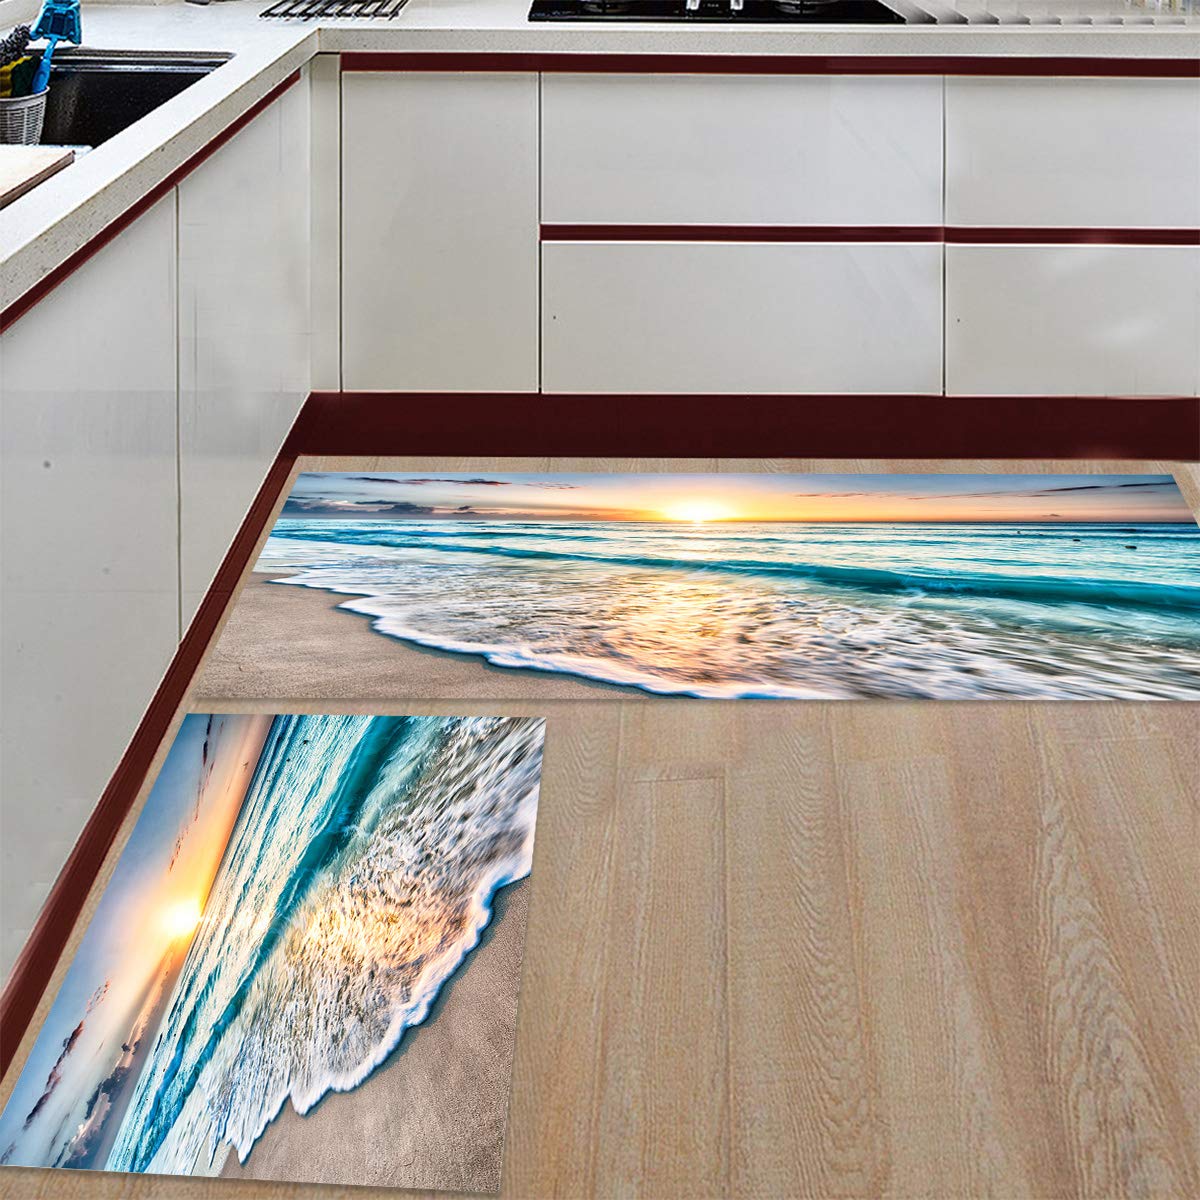 SODIKA Anti Fatigue Kitchen Rug Comfort Floor Non Slip Kitchen Mats and Rugs for Floor Home, Office, Sink, Laundry - Ocean Theme Sand Beach Wave Sea Water Pattern (15.7"x23.6"+15.7"x47.2" inches)